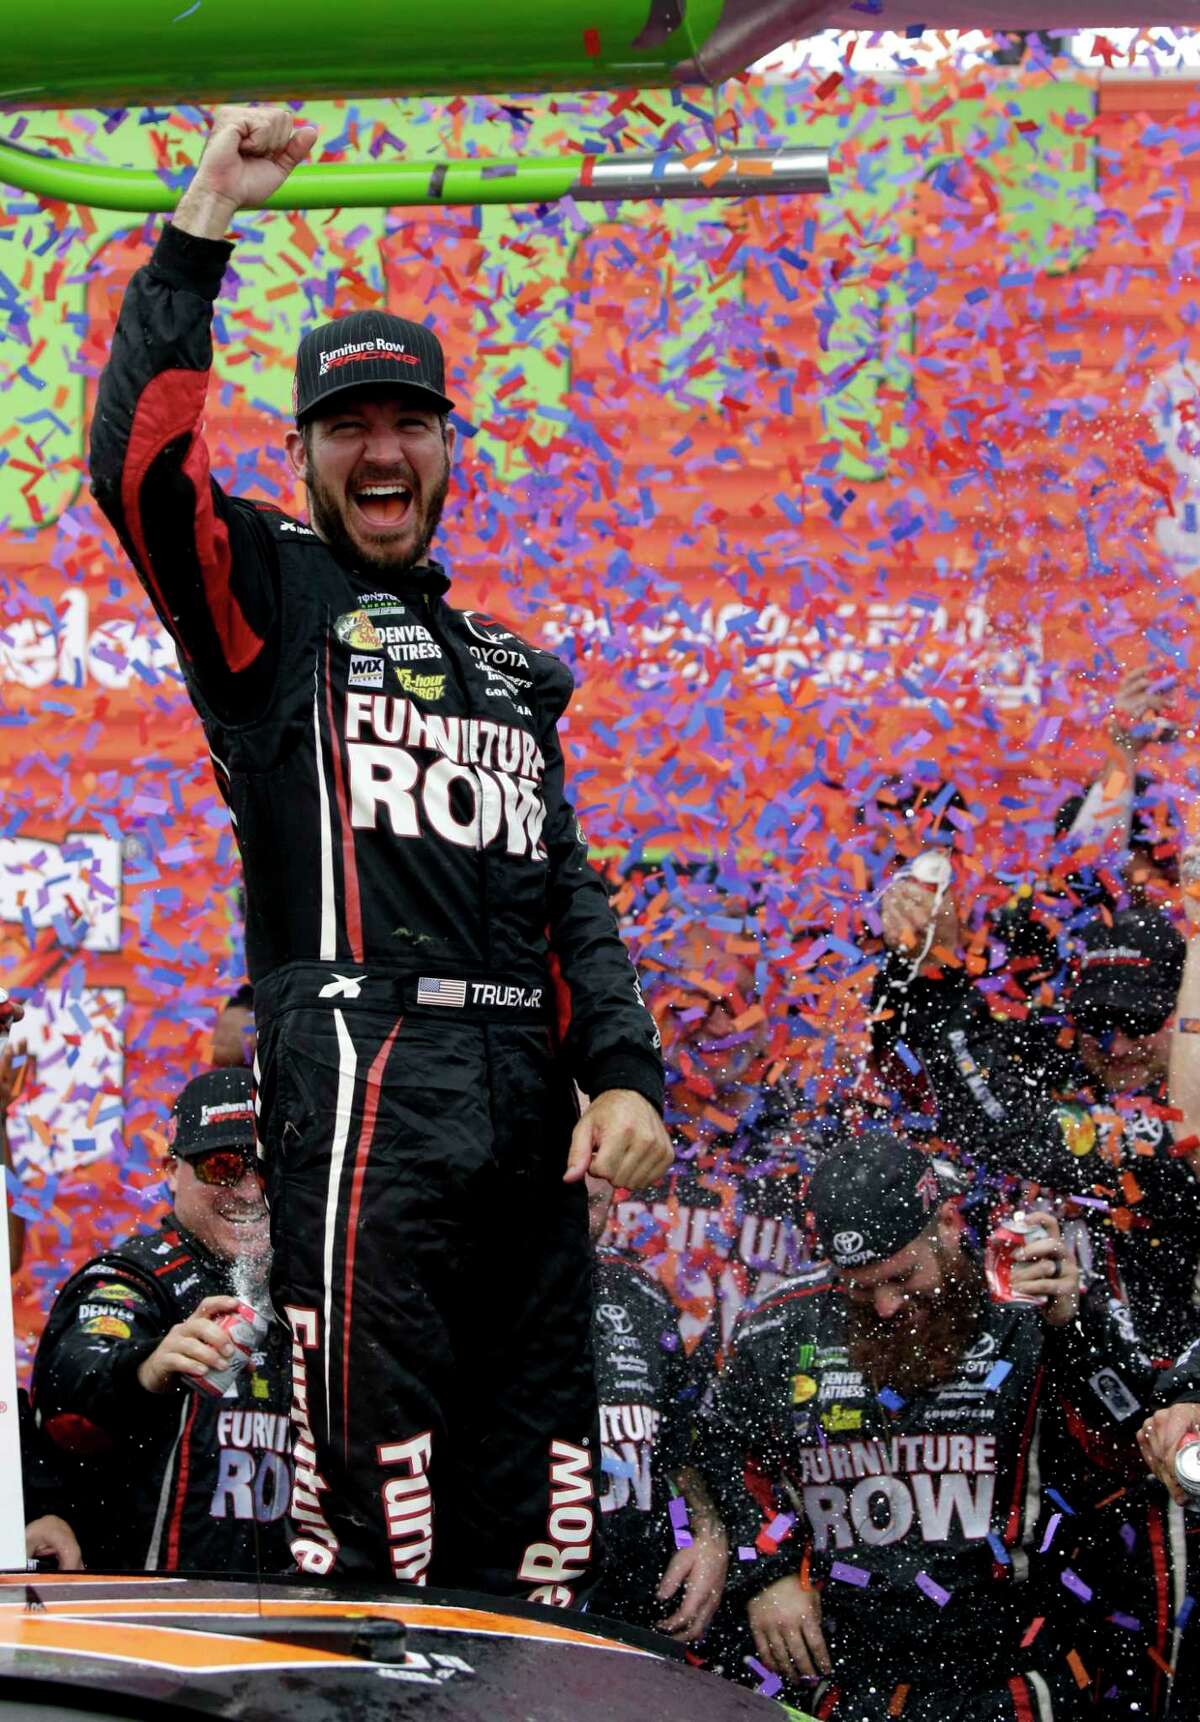 Martin Truex Jr. celebrates with his crew in Victory Lane after winning a NASCAR Cup Monster Energy Series auto race at Chicagoland Speedway in Joliet, Ill., Sunday, Sept. 17, 2017. (AP Photo/Nam Y. Huh)